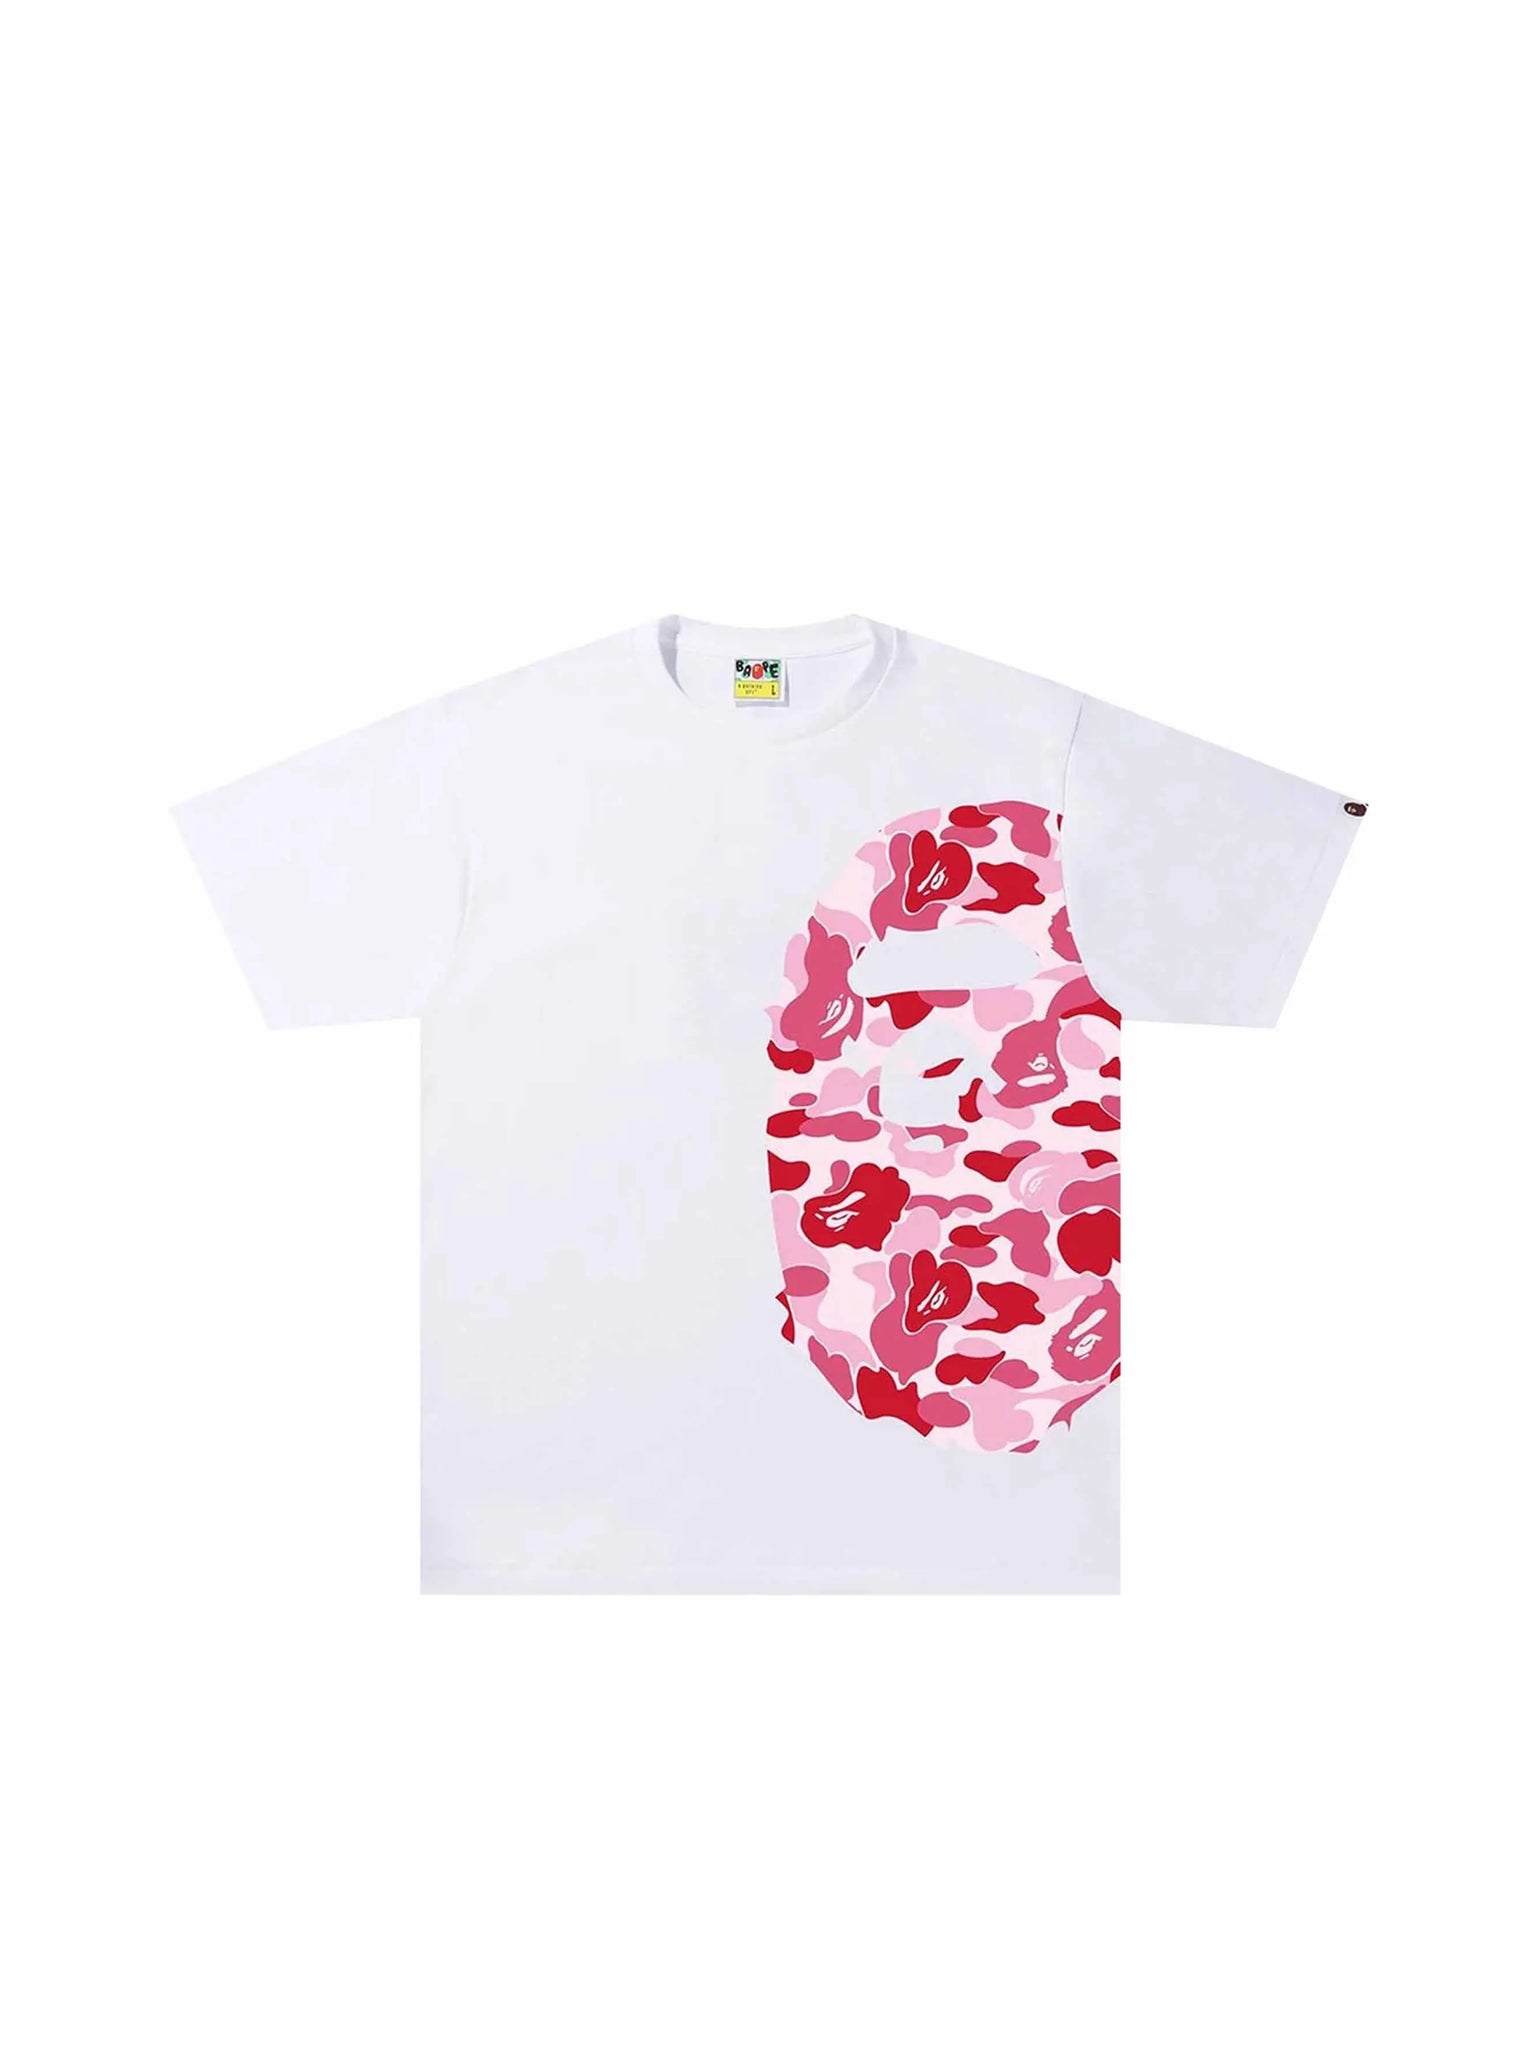 A Bathing Ape ABC Camo Side Big Ape Head Tee White/Pink in Auckland, New Zealand - Shop name